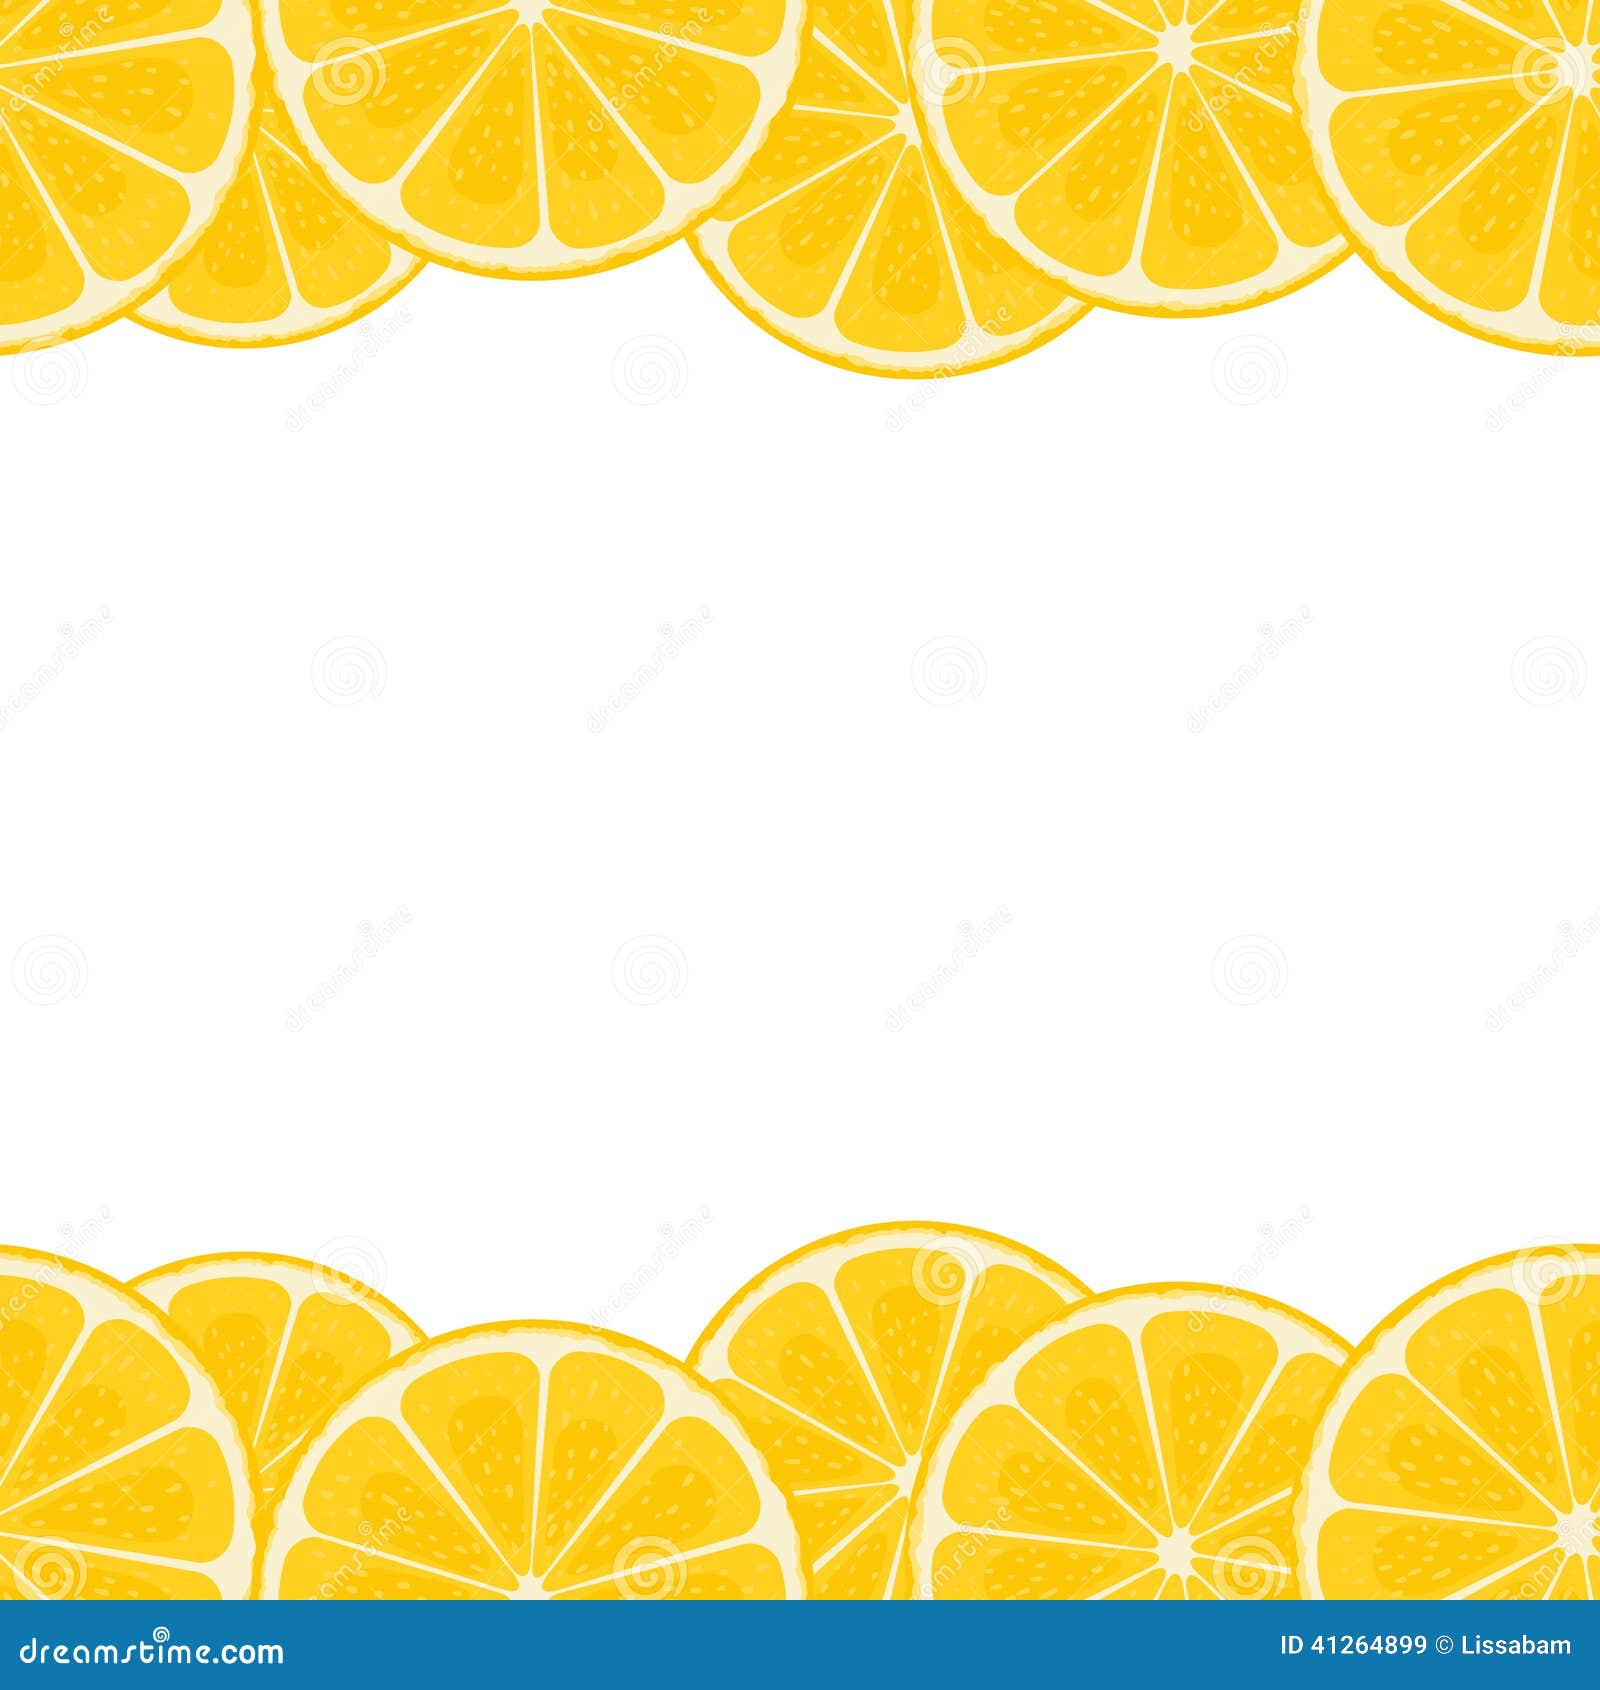 yellow paper clipart - photo #26